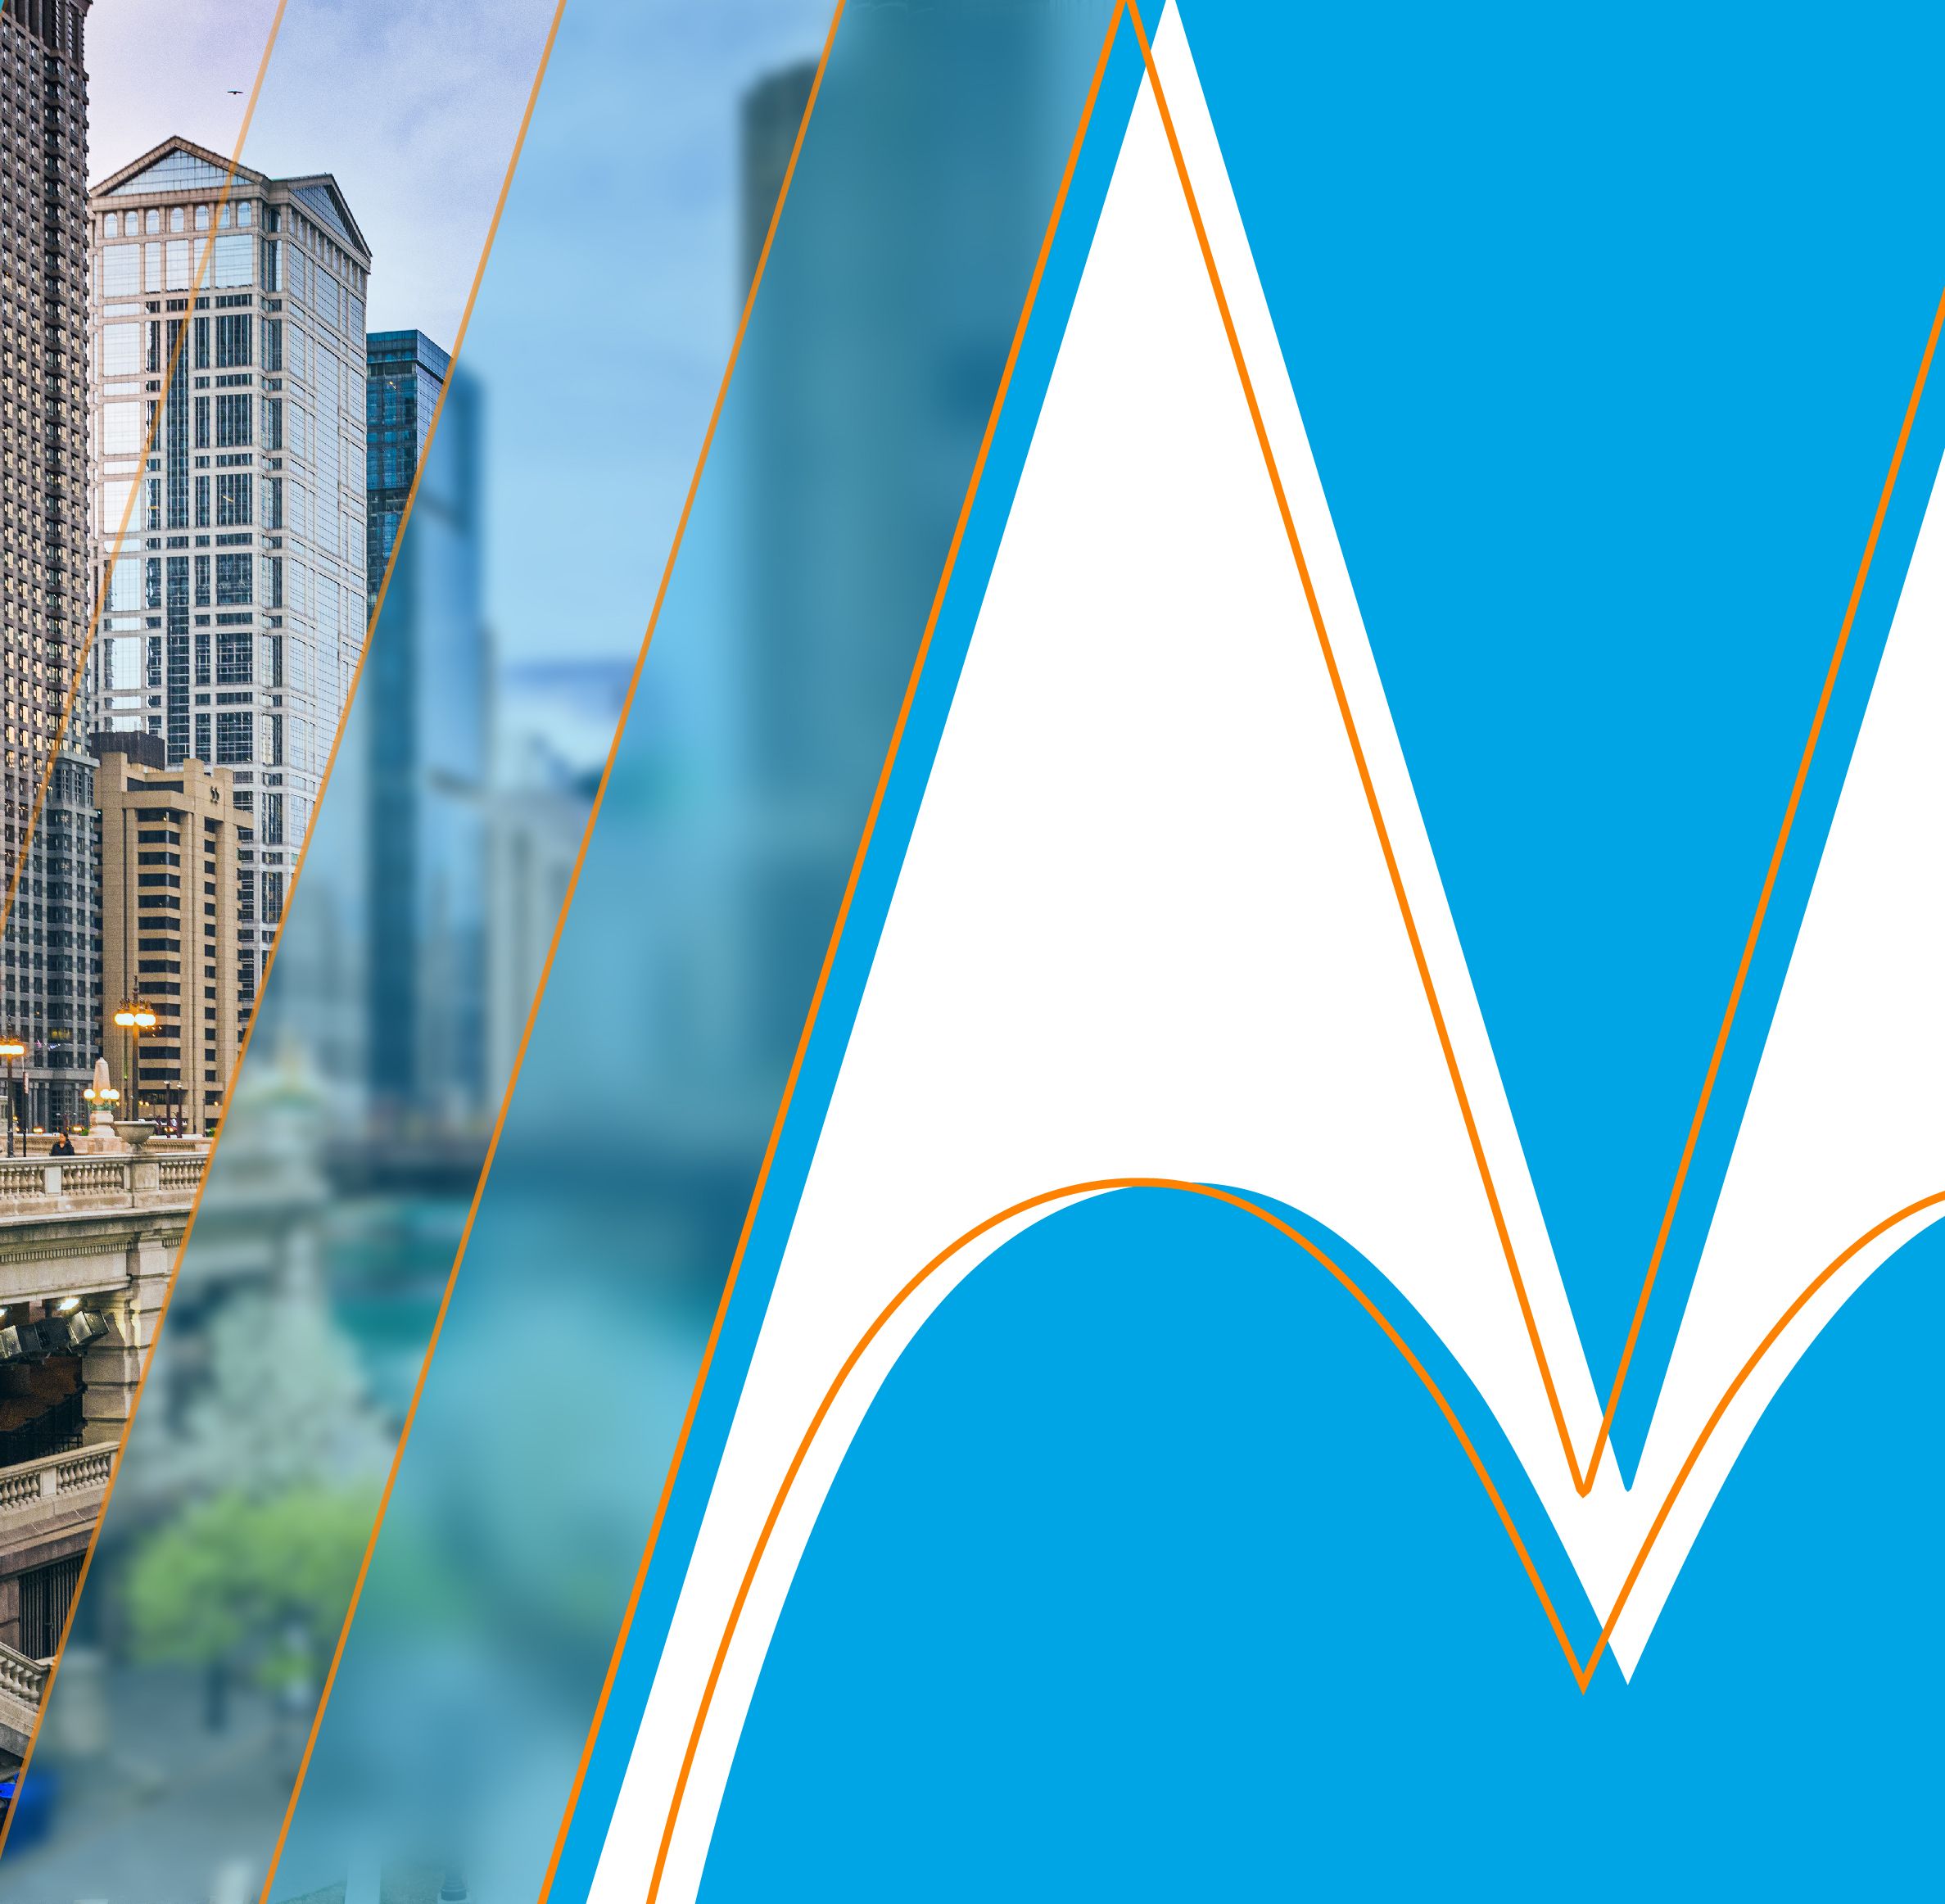 Image of Chicago city view on left and Motorola logo on right